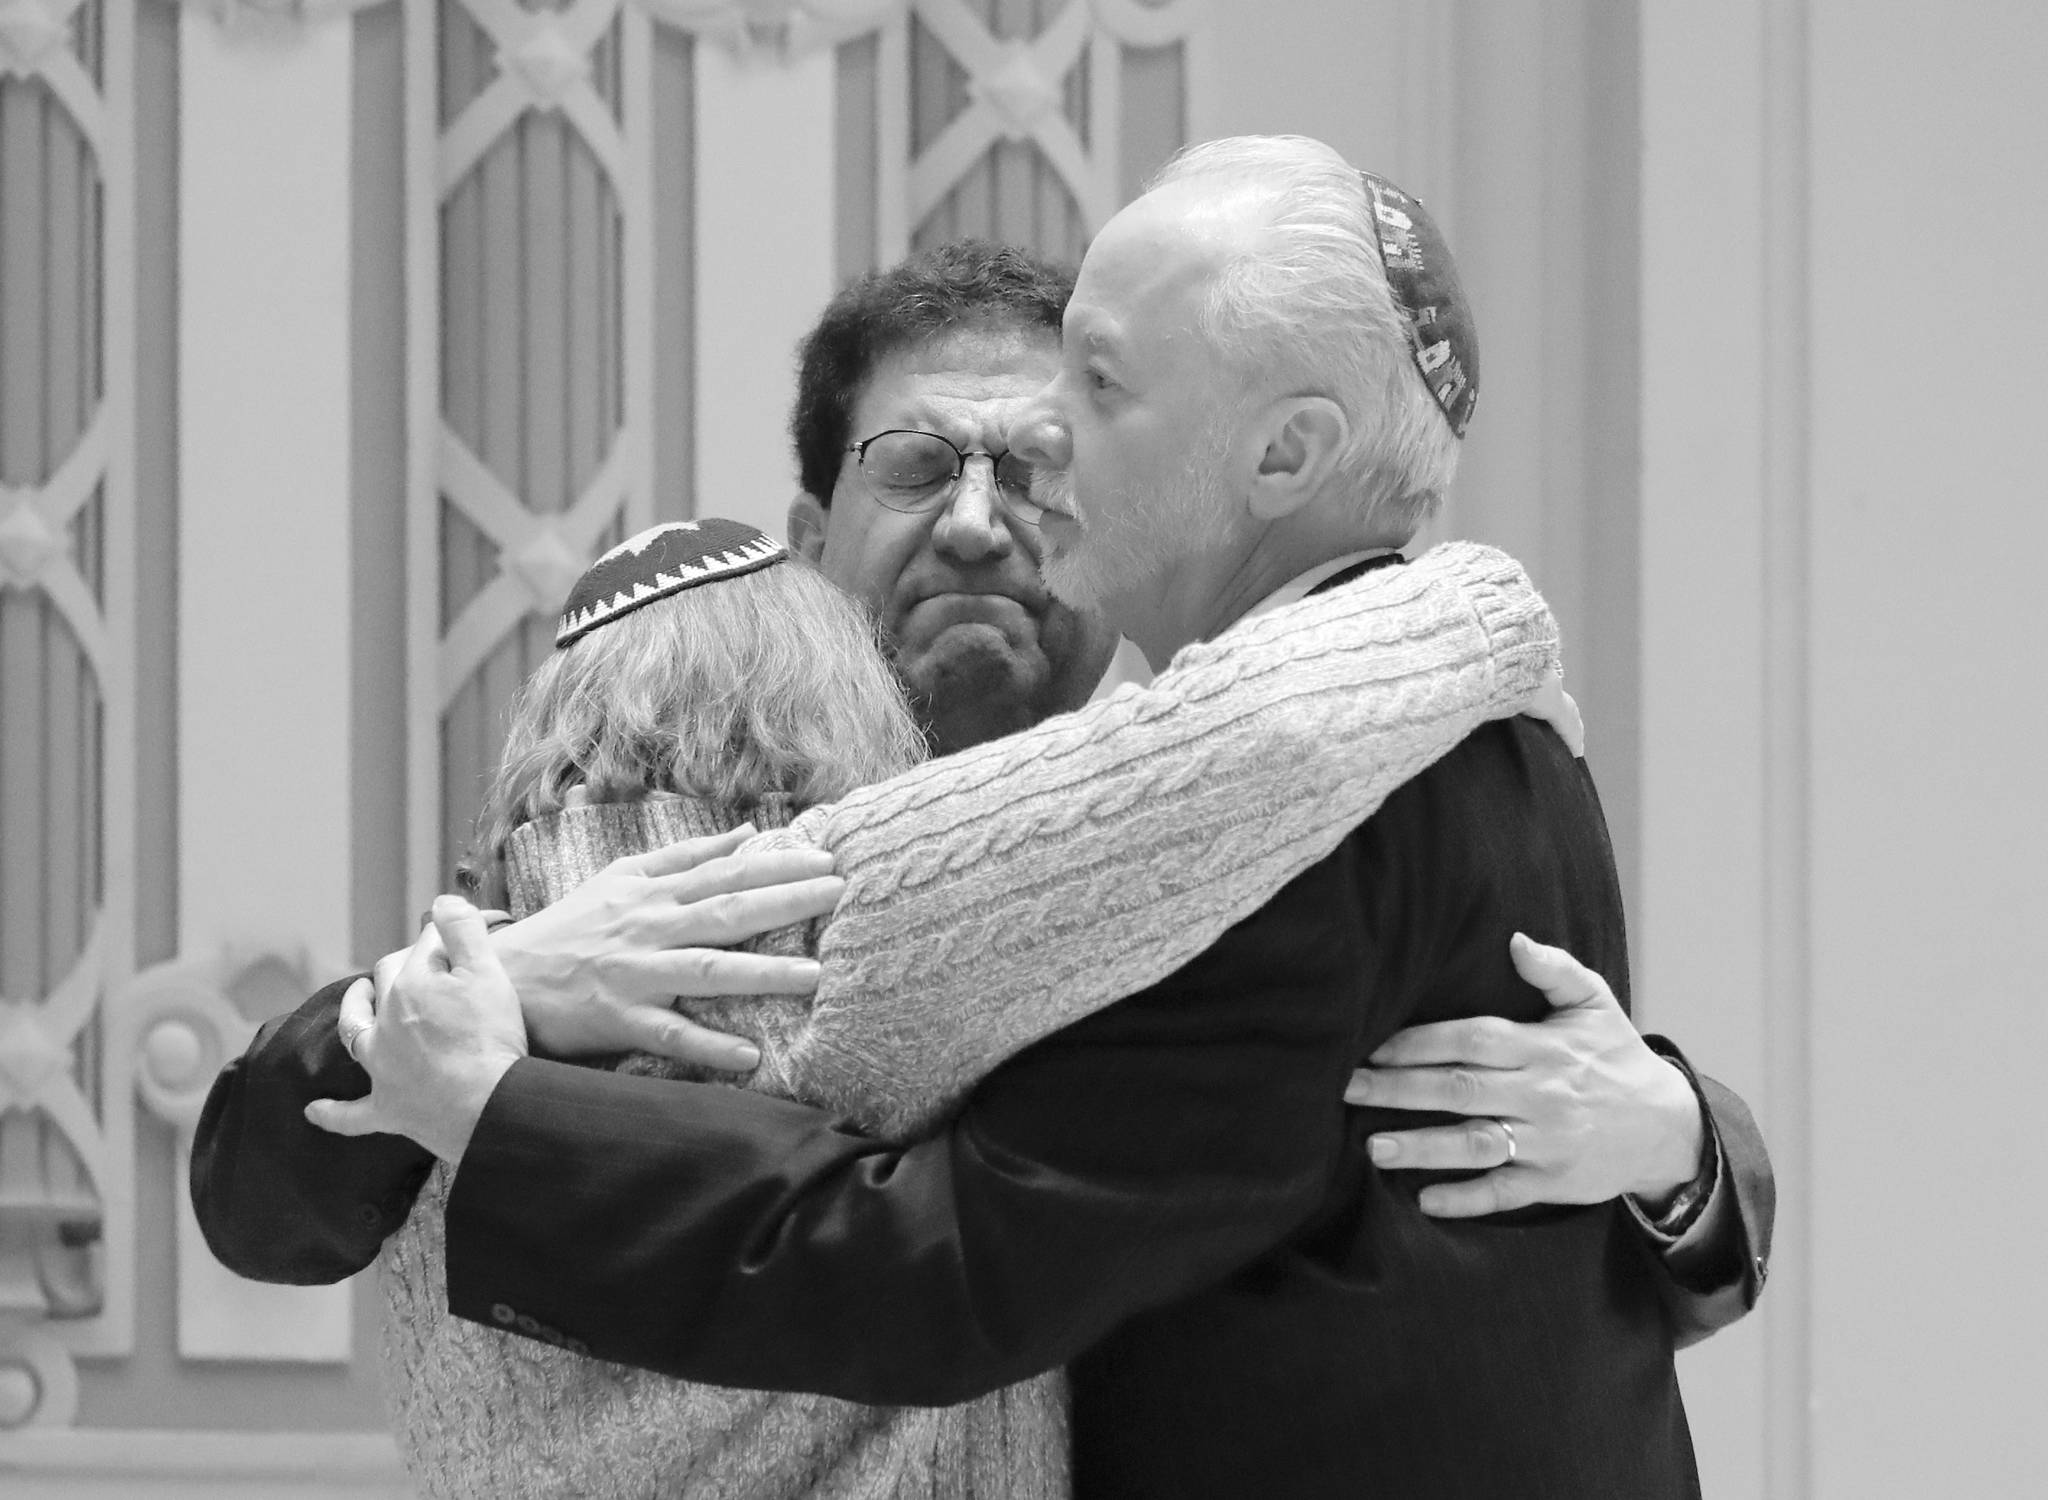 In this Oct. 28 file photo, Rabbi Jeffrey Myers, right, of Tree of Life/Or L’Simcha Congregation hugs Rabbi Cheryl Klein, left, of Dor Hadash Congregation and Rabbi Jonathan Perlman during a community gathering held in the aftermath of a deadly shooting at the Tree of Life Synagogue in Pittsburgh. (AP Photo/Matt Rourke, File)